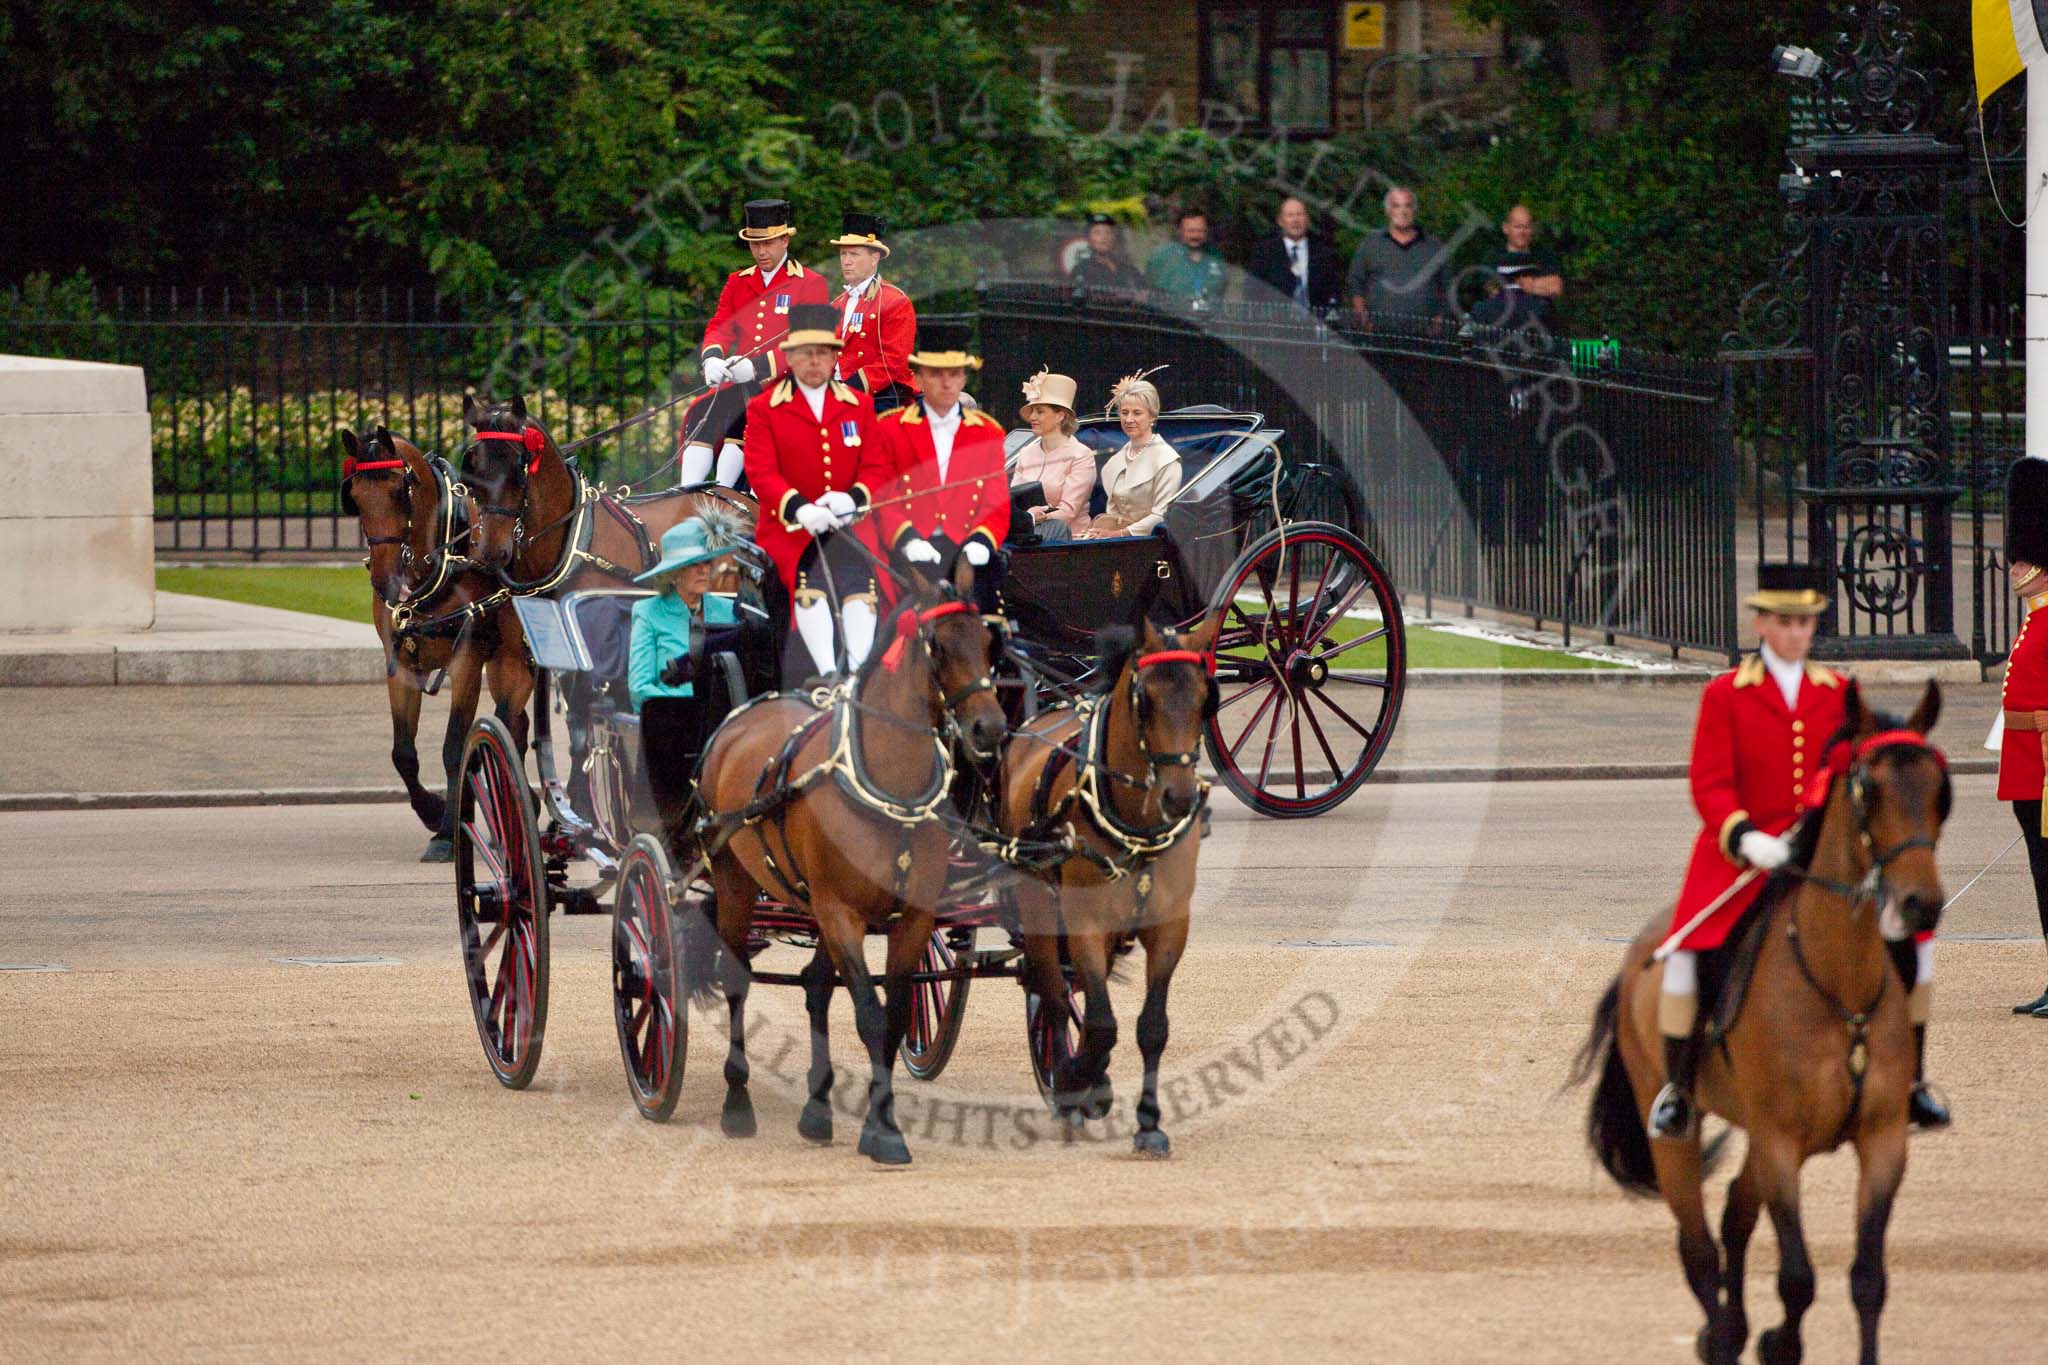 Trooping the Colour 2009: The two barouche carriages with members of the Royal Family arrive at Horse Guards Parade. In the first carriage just visible HRH the Duchess of Cornwall, in the second HRH the Countess of Wessex and HRH the Duchess of Cornwall..
Horse Guards Parade, Westminster,
London SW1,

United Kingdom,
on 13 June 2009 at 10:48, image #91